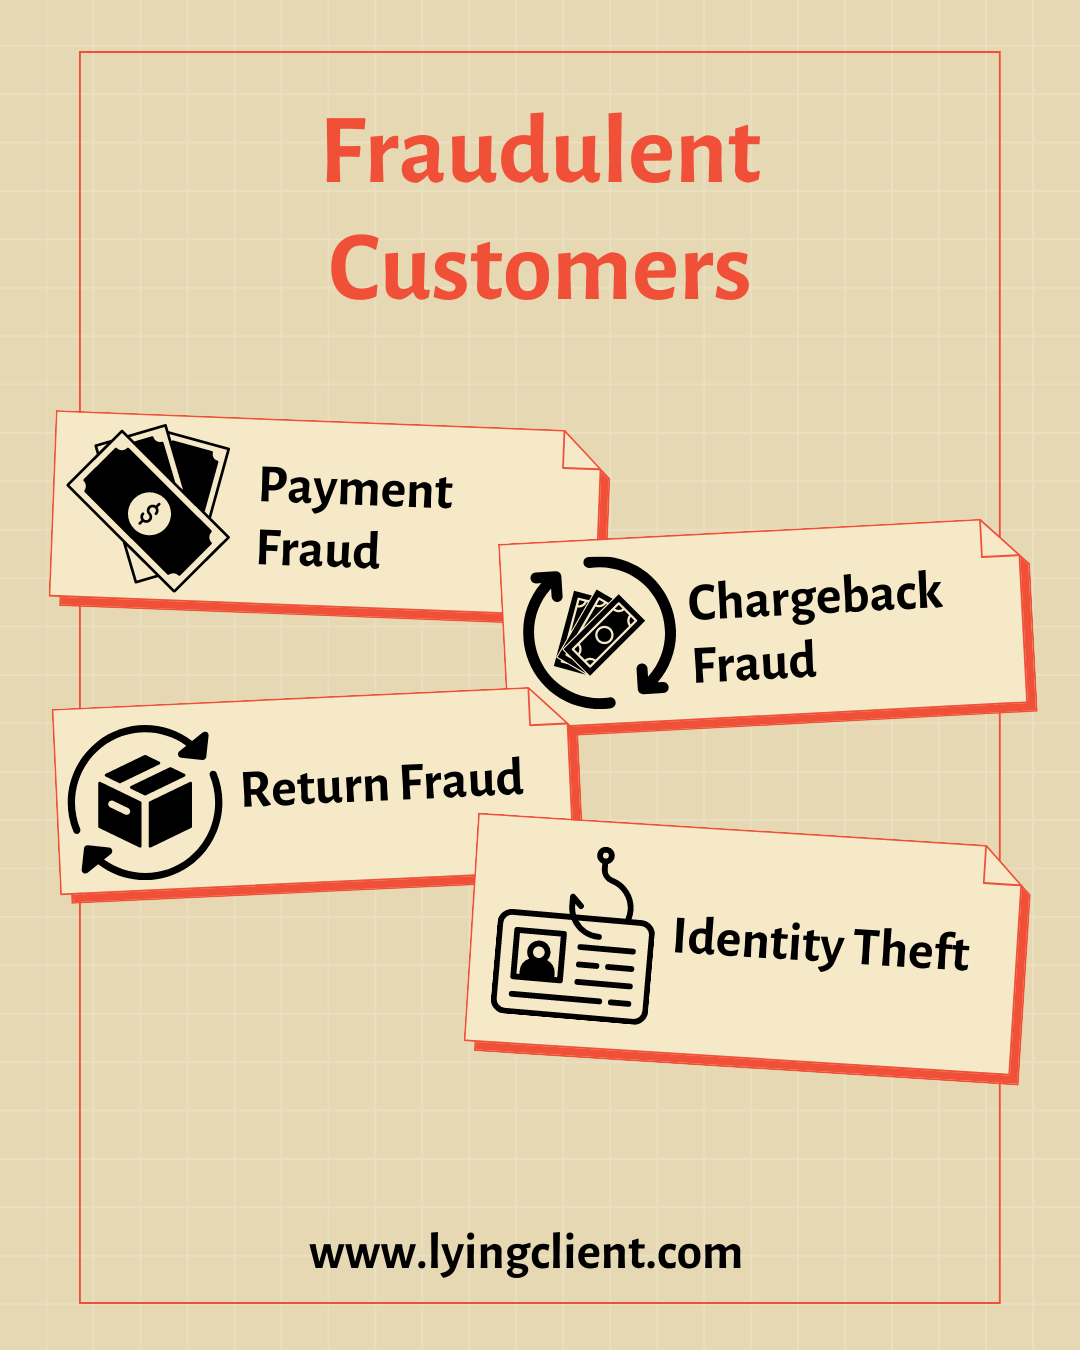 Dealing with Fraudulent Customers